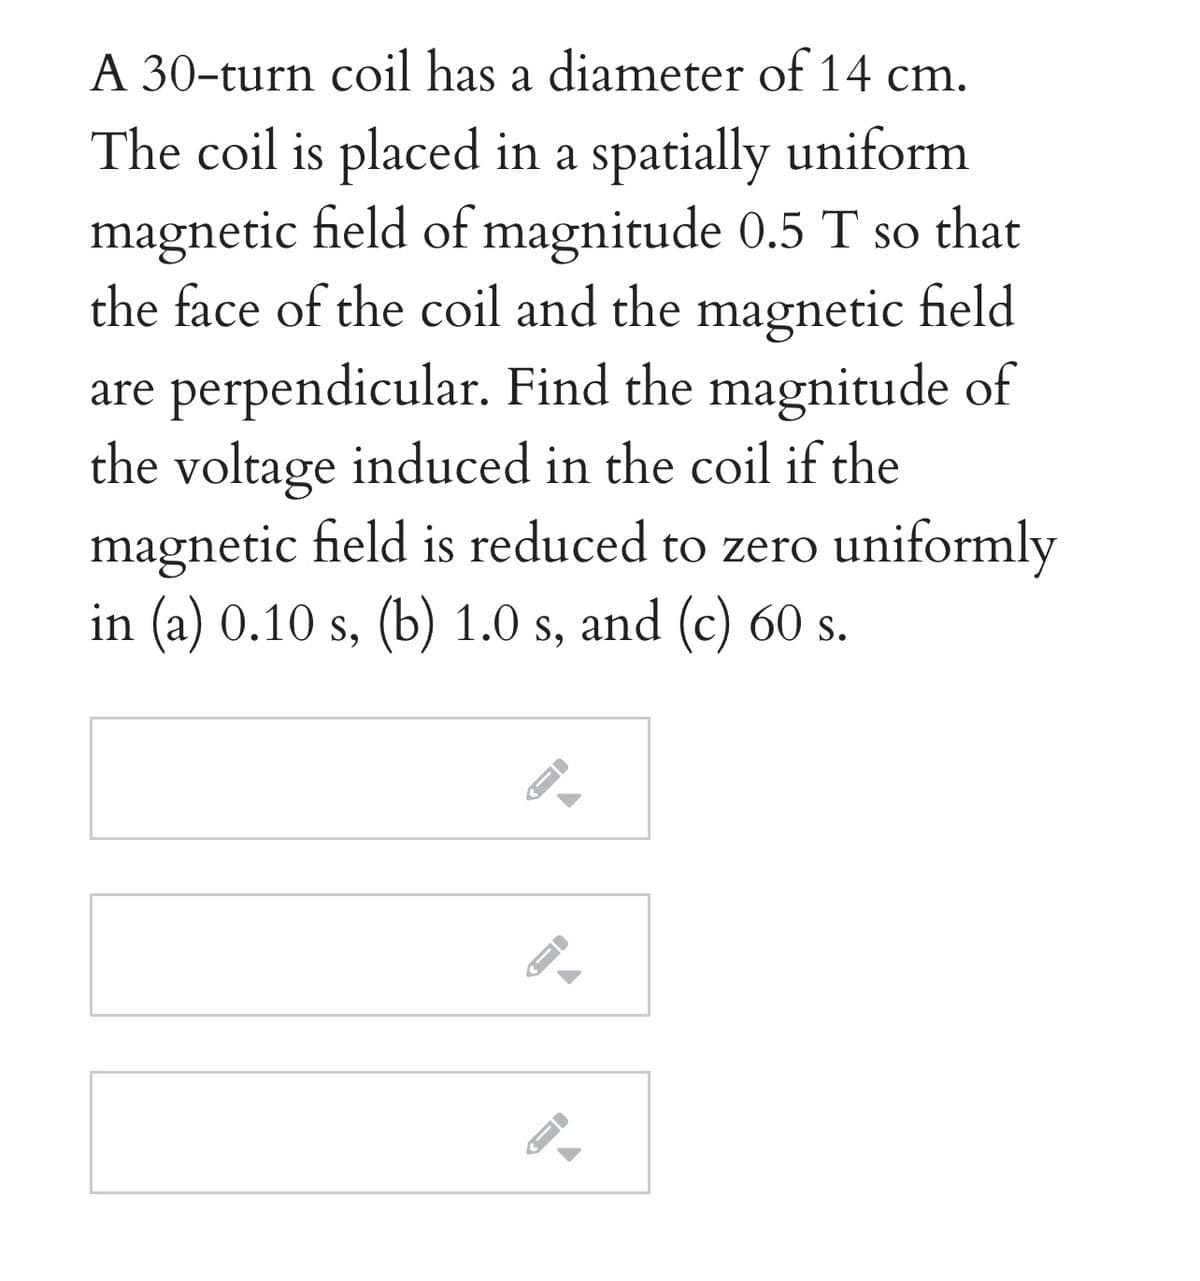 A 30-turn coil has a diameter of 14 cm.
The coil is placed in a spatially uniform
magnetic field of magnitude 0.5 T so that
the face of the coil and the magnetic field
are perpendicular. Find the magnitude of
the voltage induced in the coil if the
magnetic field is reduced to zero uniformly
in (a) 0.10 s, (b) 1.0 s, and (c) 60 s.
